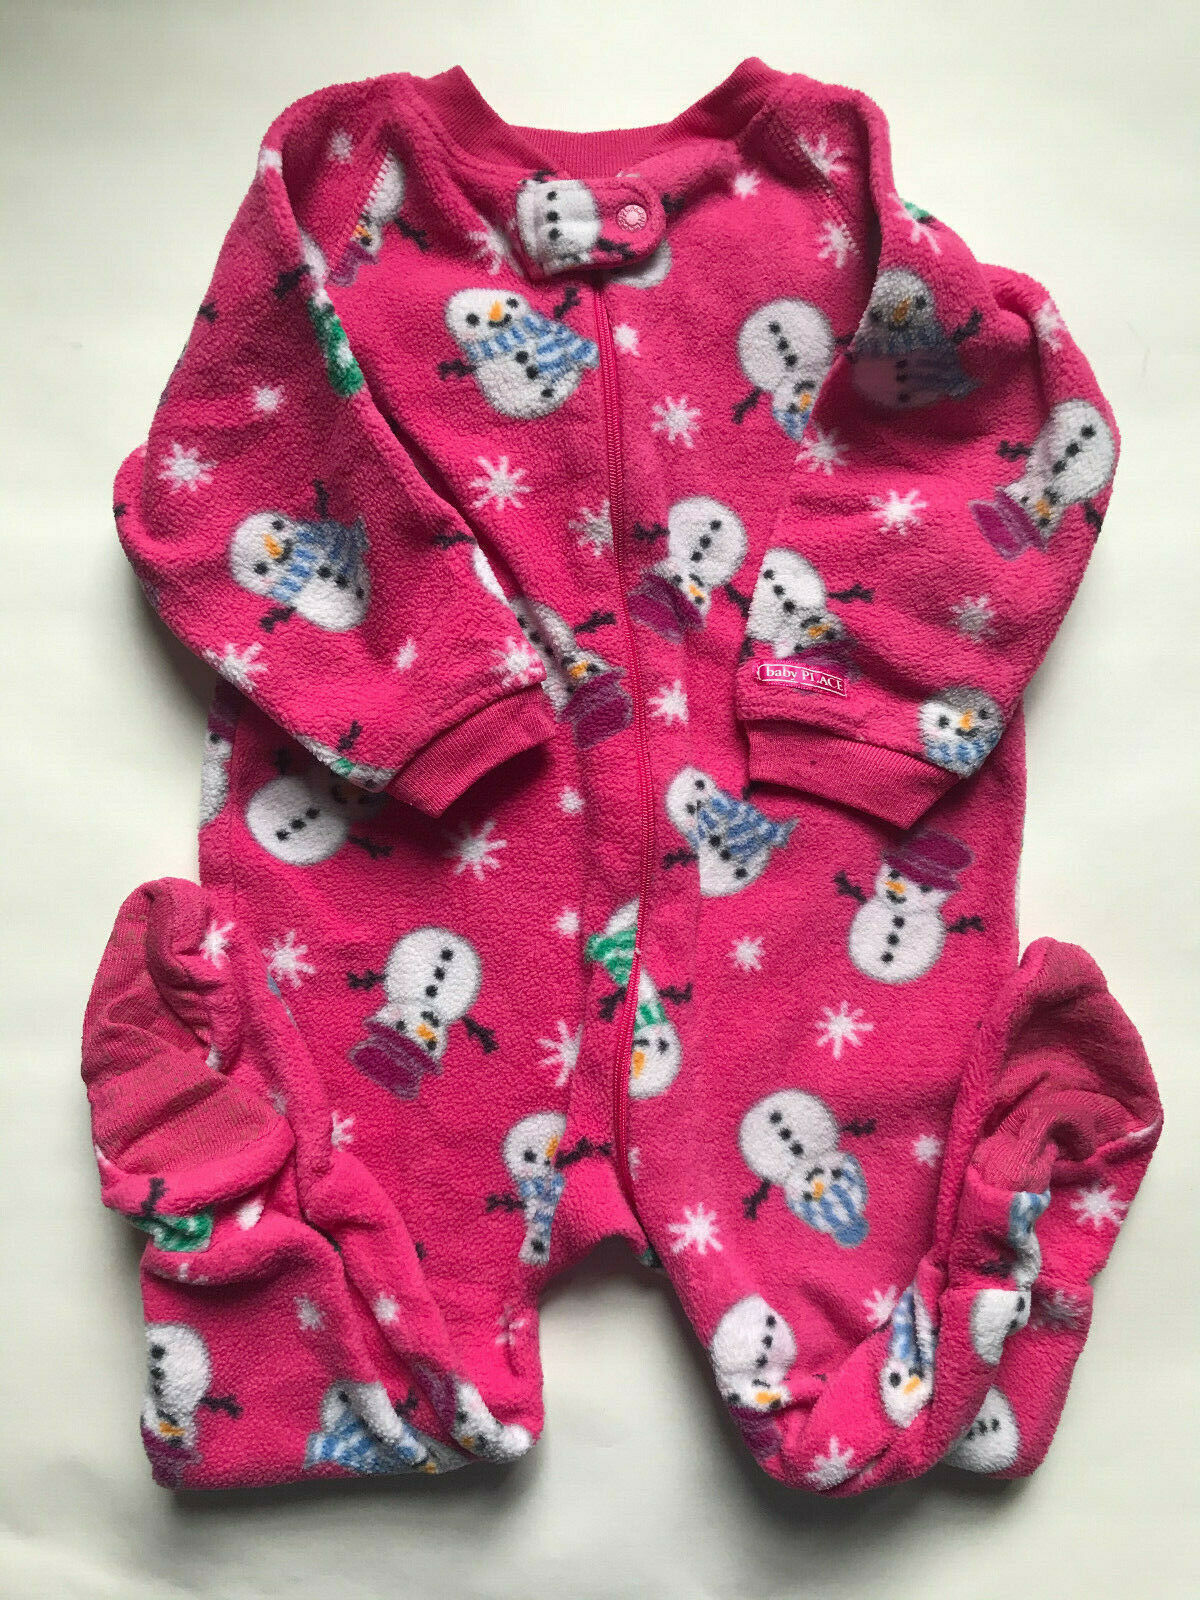 Girl's Size 12-18 M Months Children's Place Pink Fleece Snowman Footed Pajama - $8.00